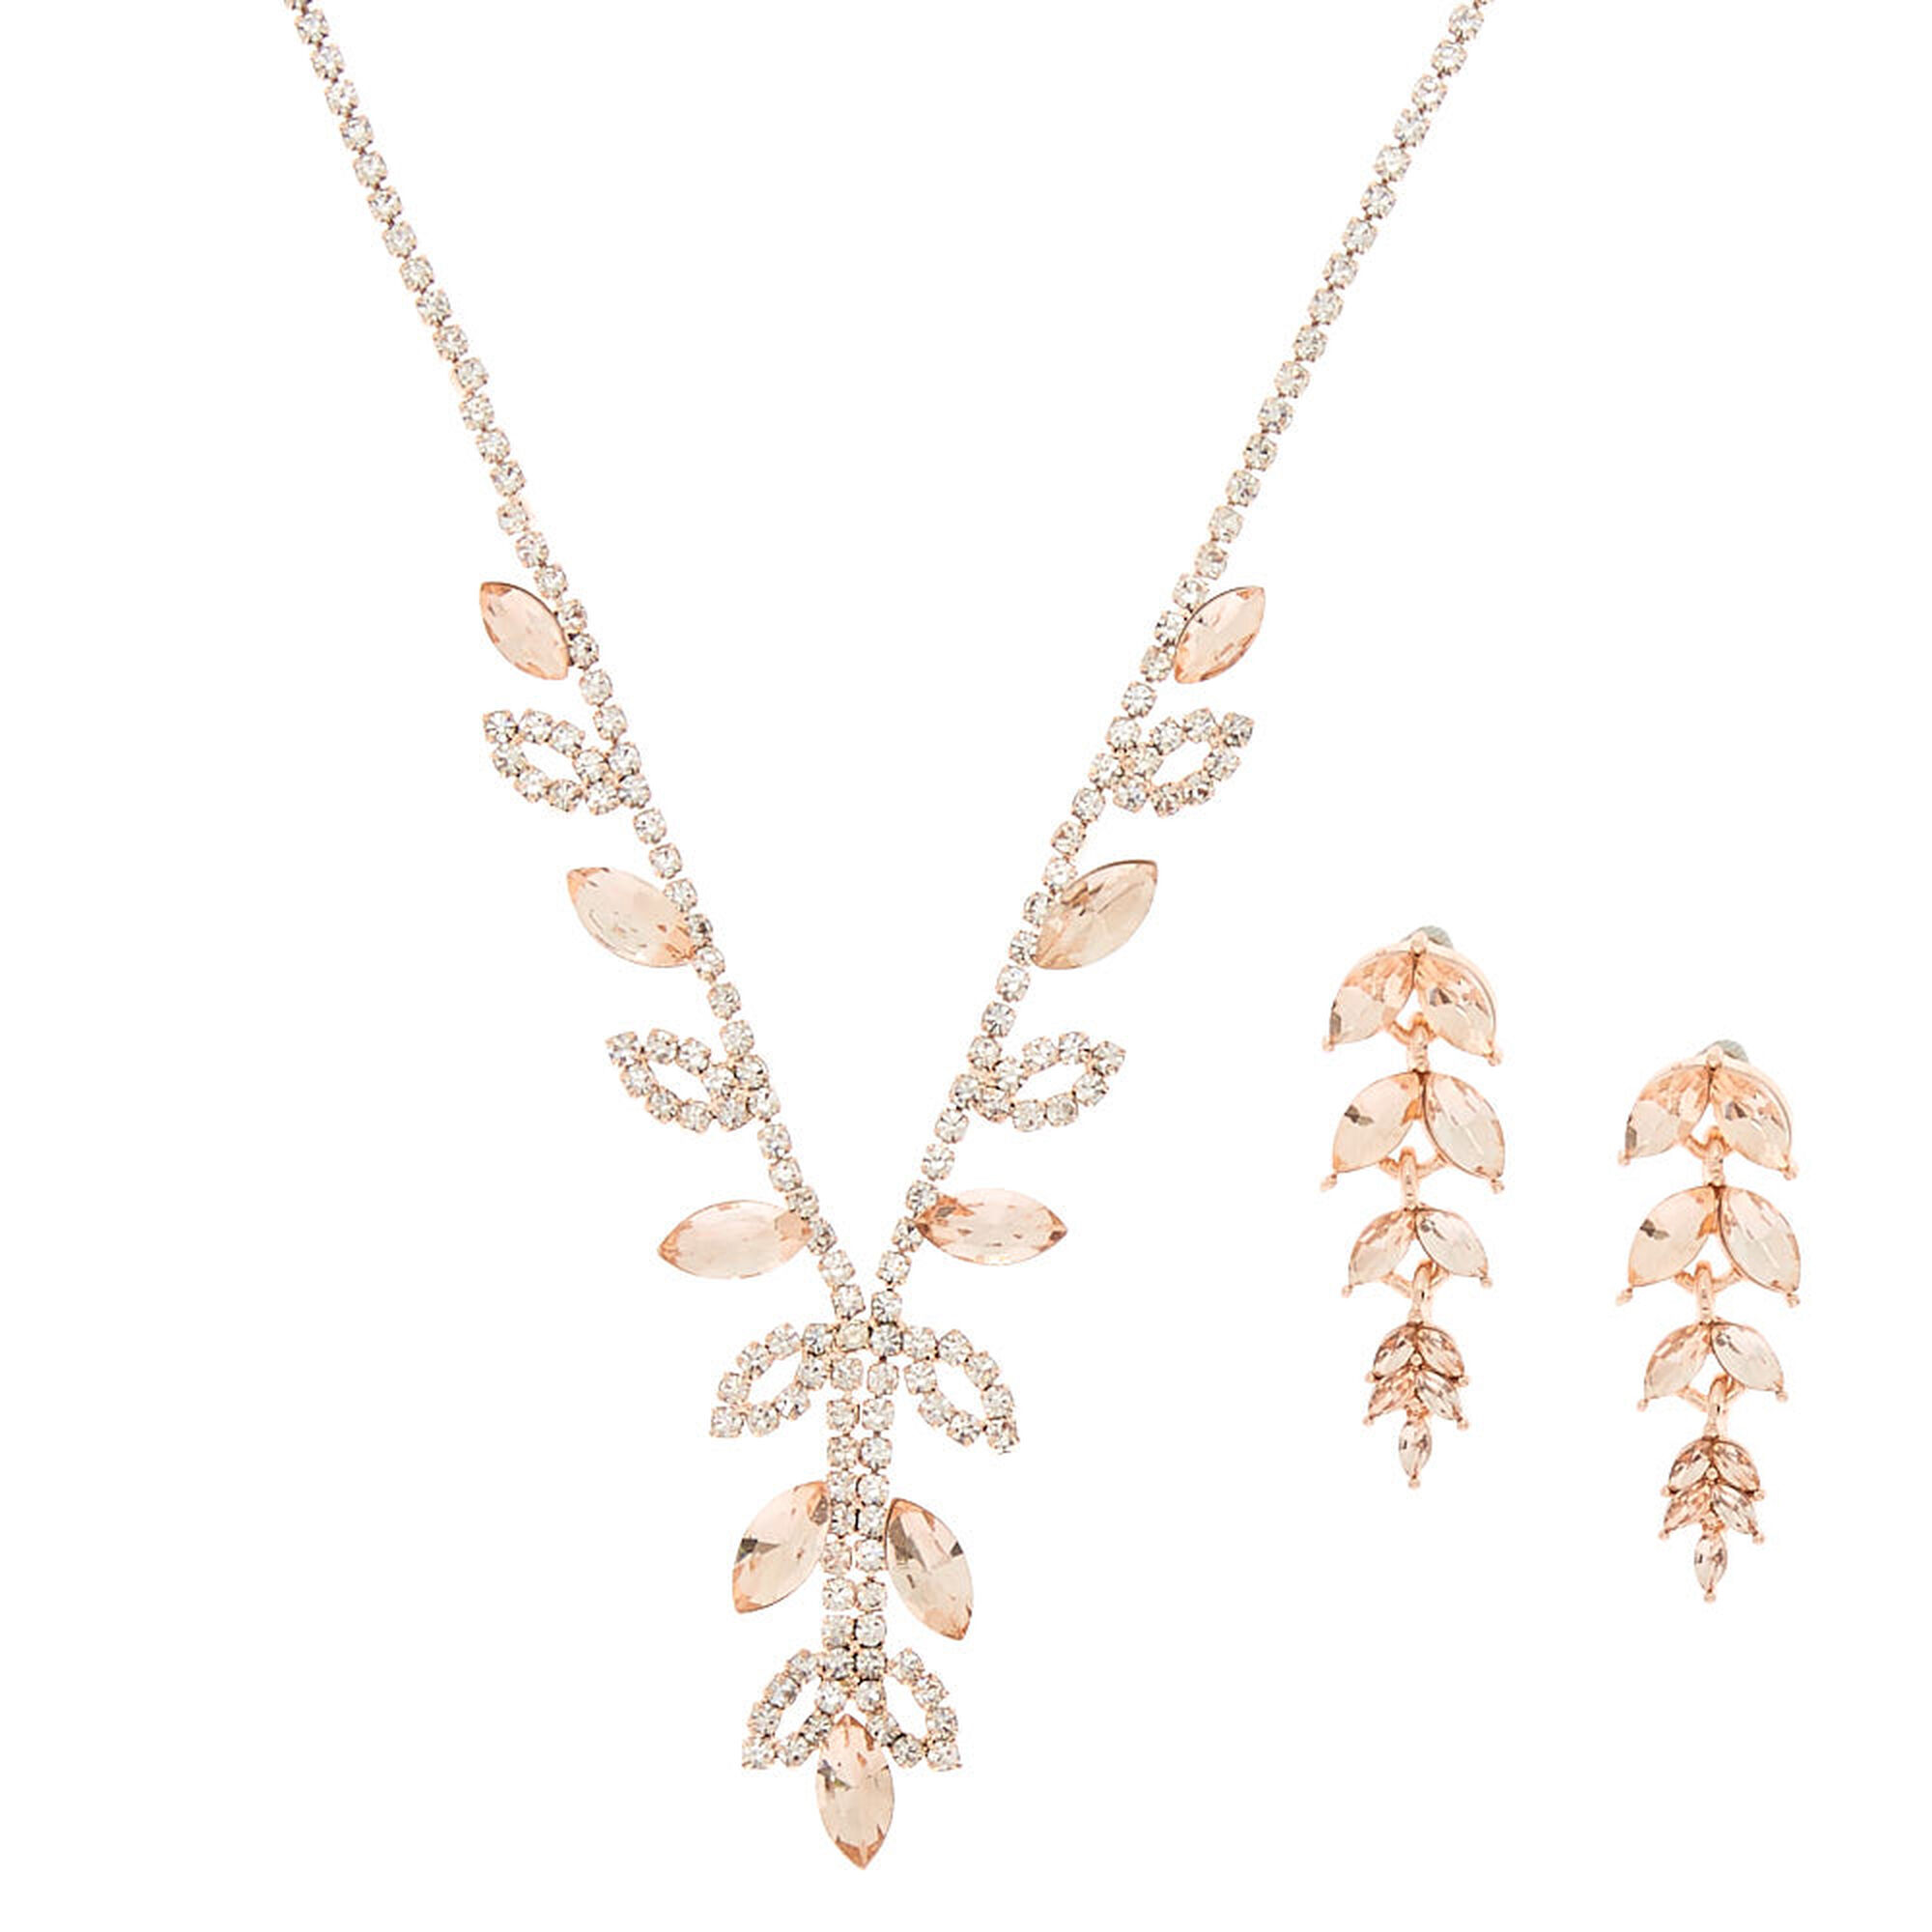 View Claires Tone Vine Jewelry Set 2 Pack Rose Gold information